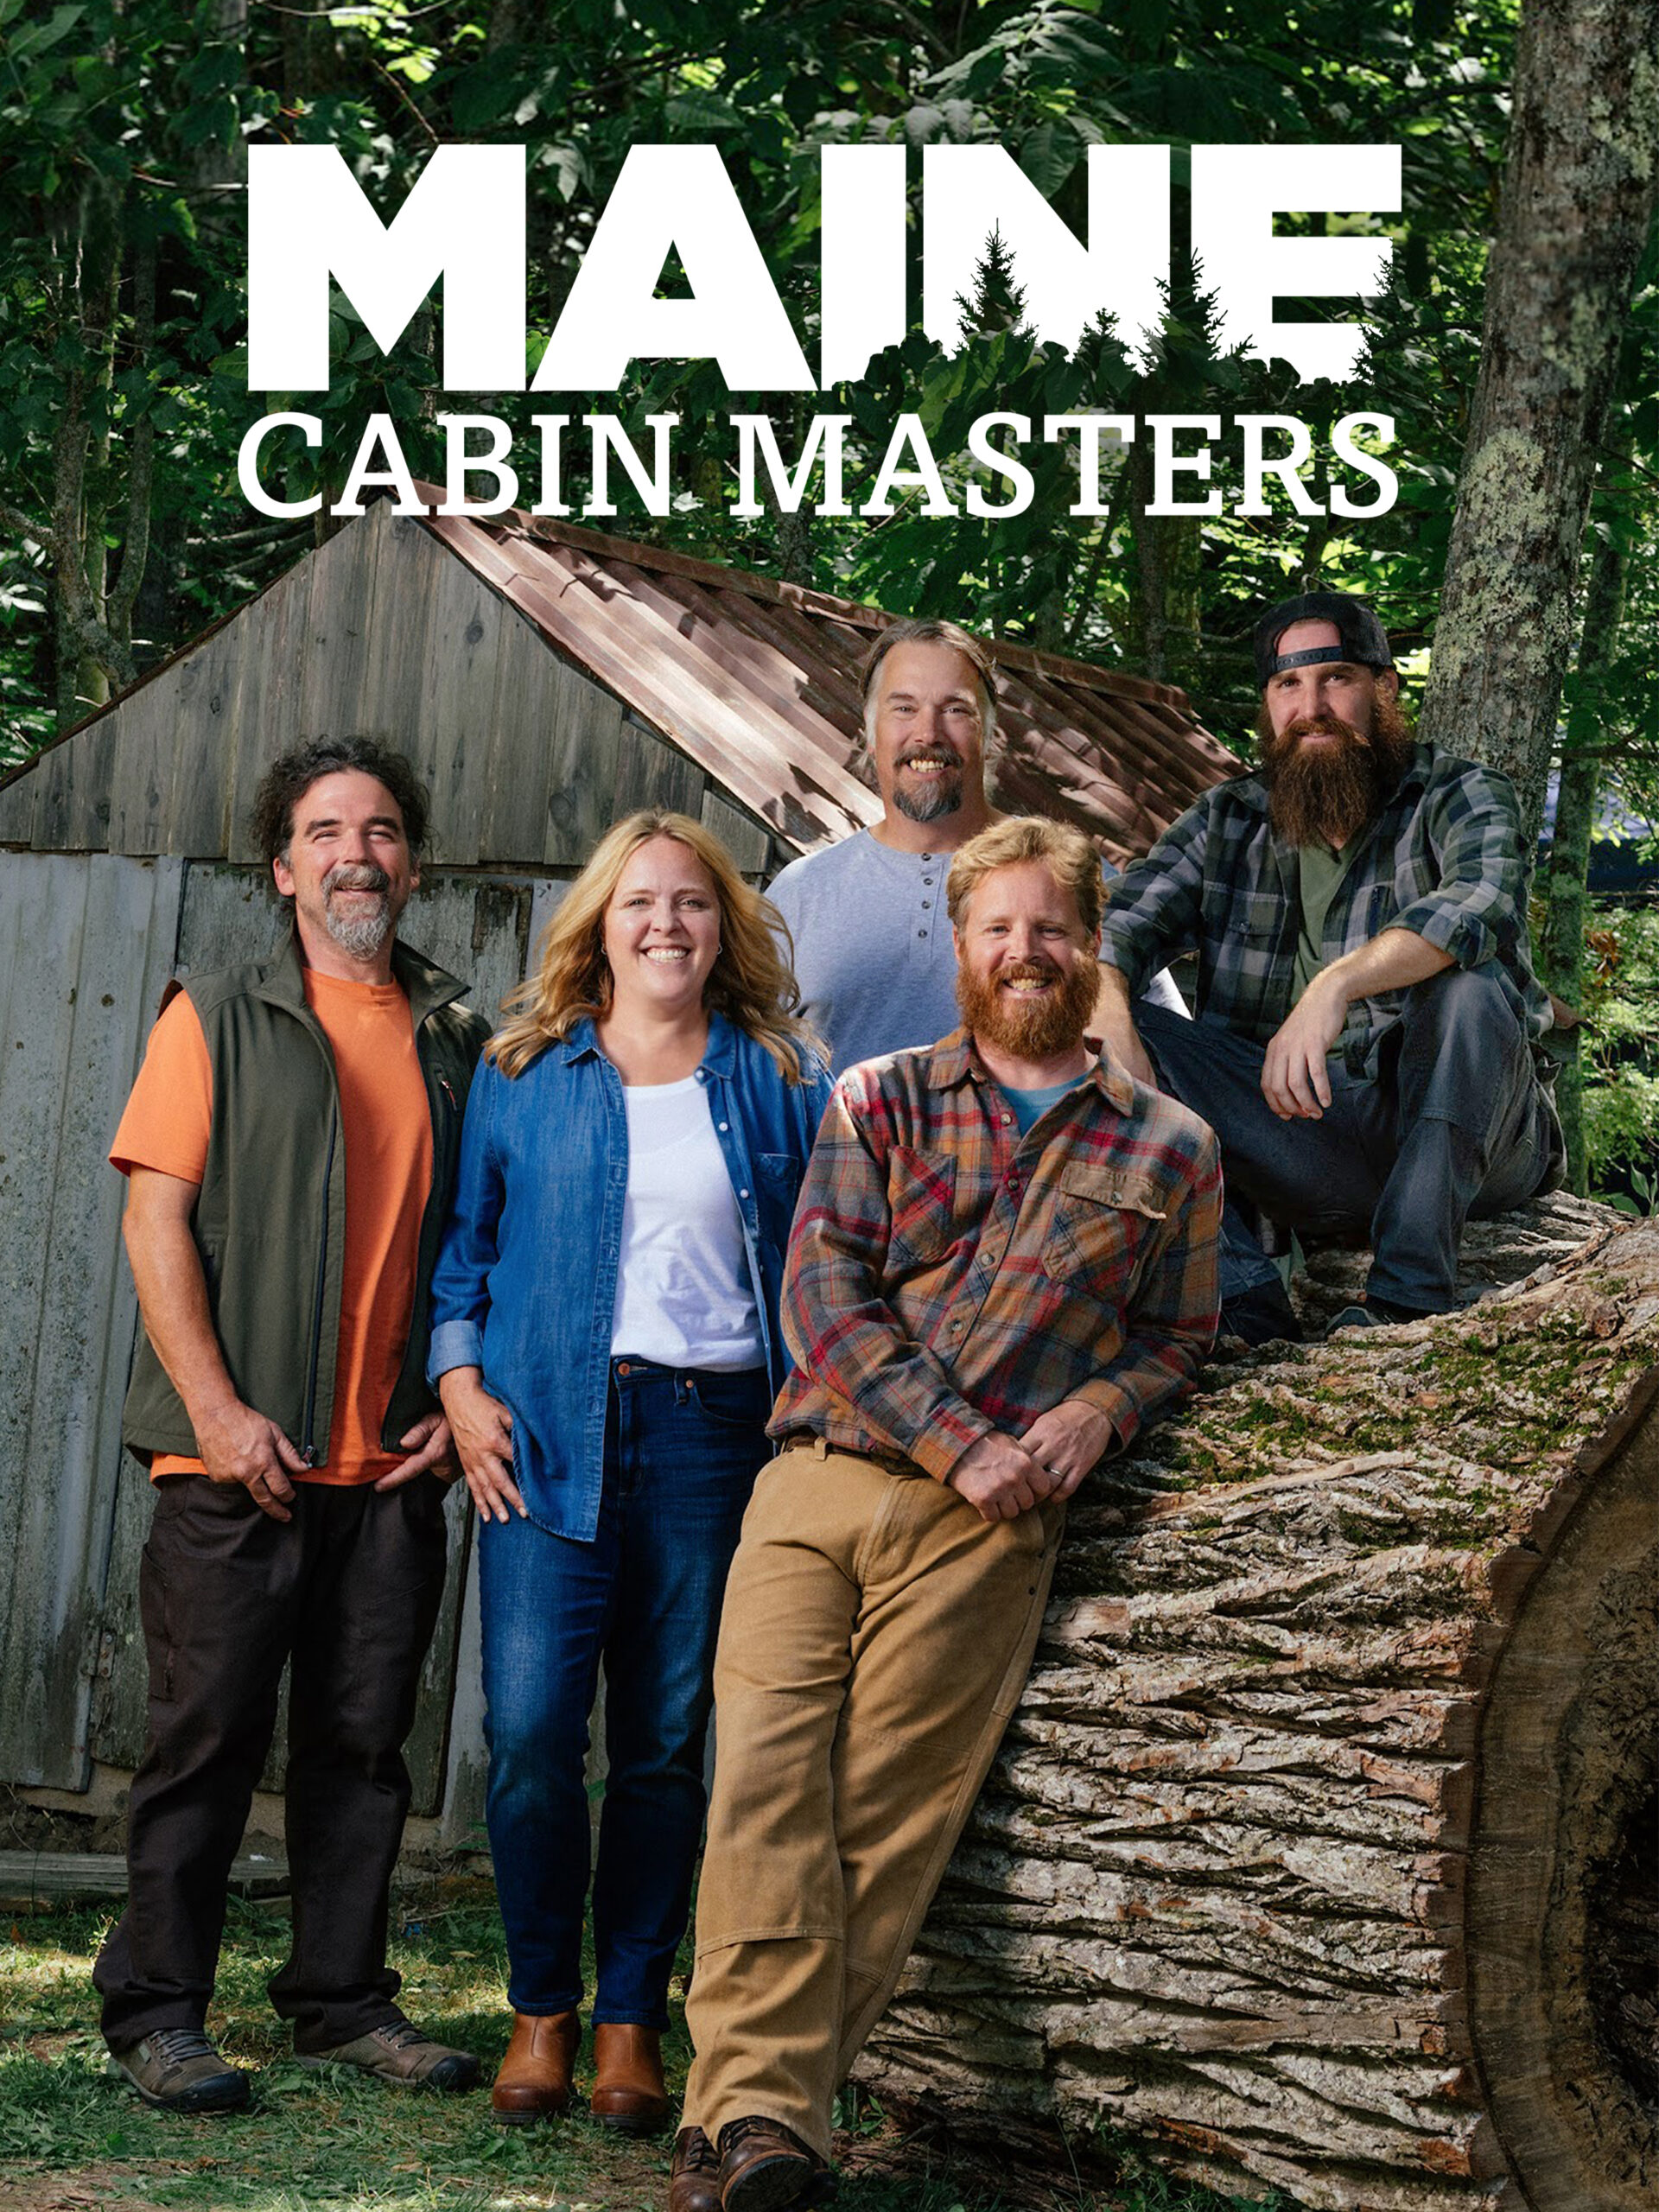 When is Maine Cabin Masters Season 9 Coming Out